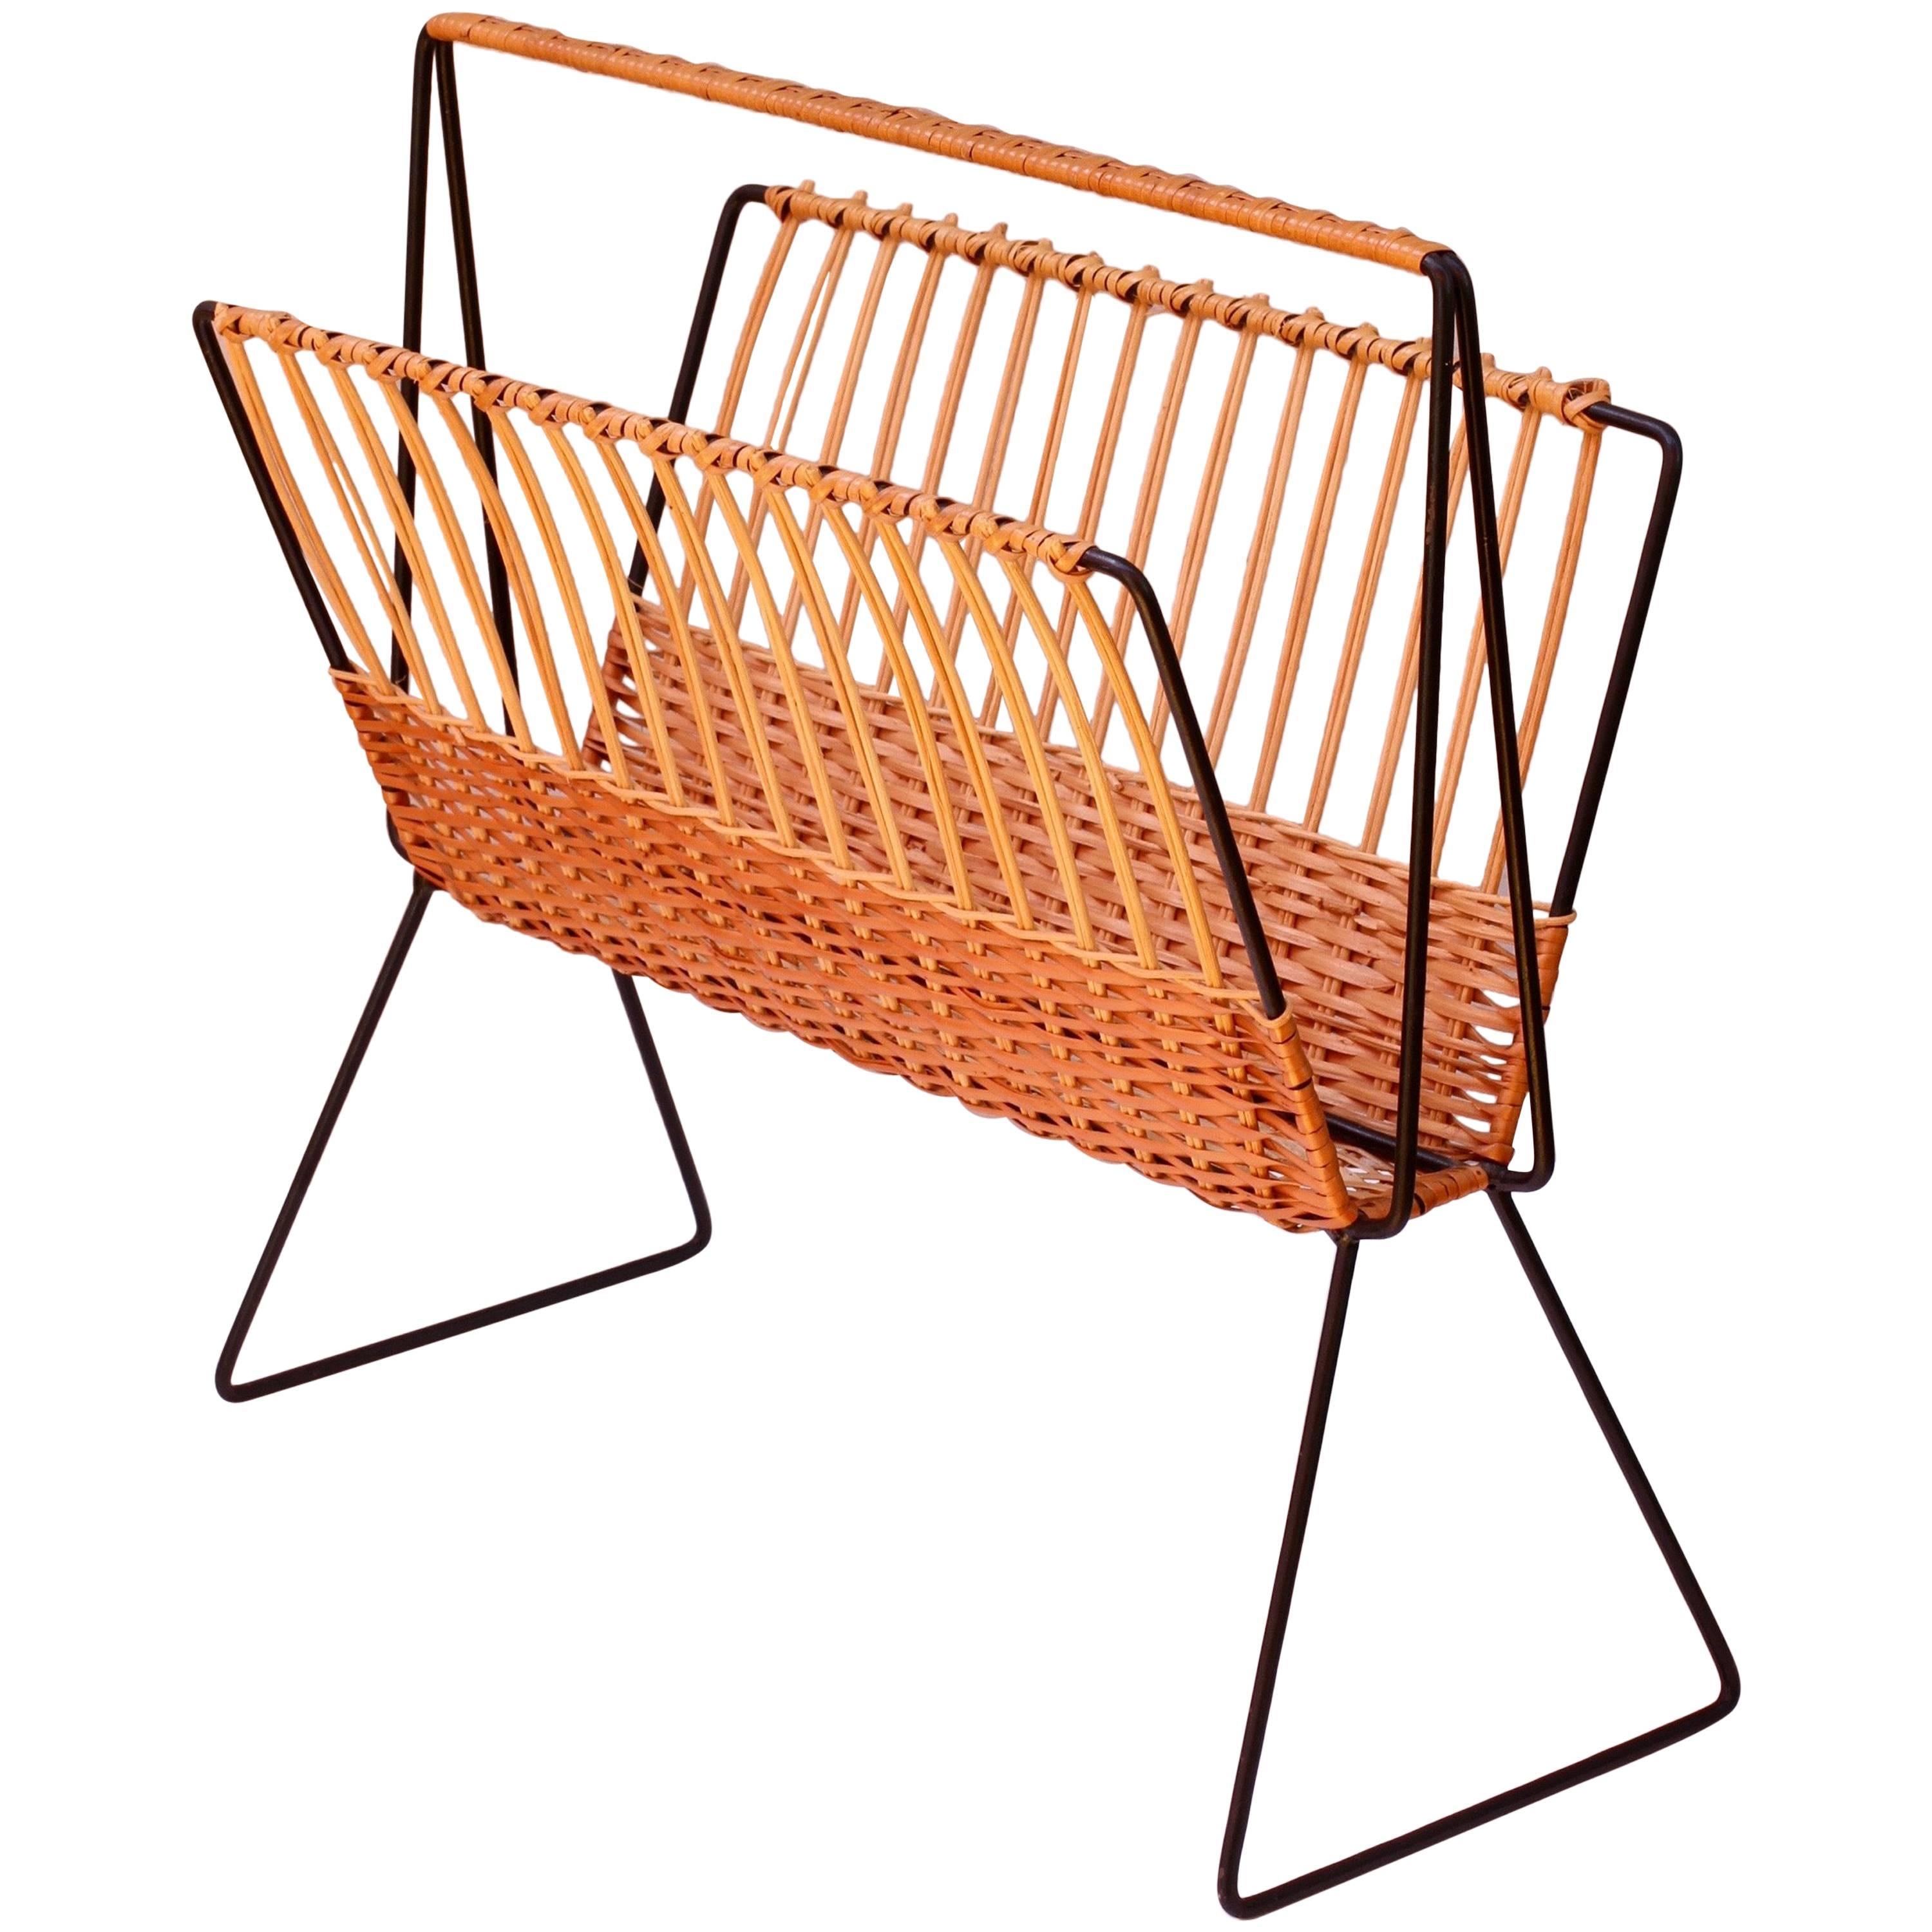 Large Mid-Century Modernist Wicker Magazine Rack Stand Attributed to Carl Auböck